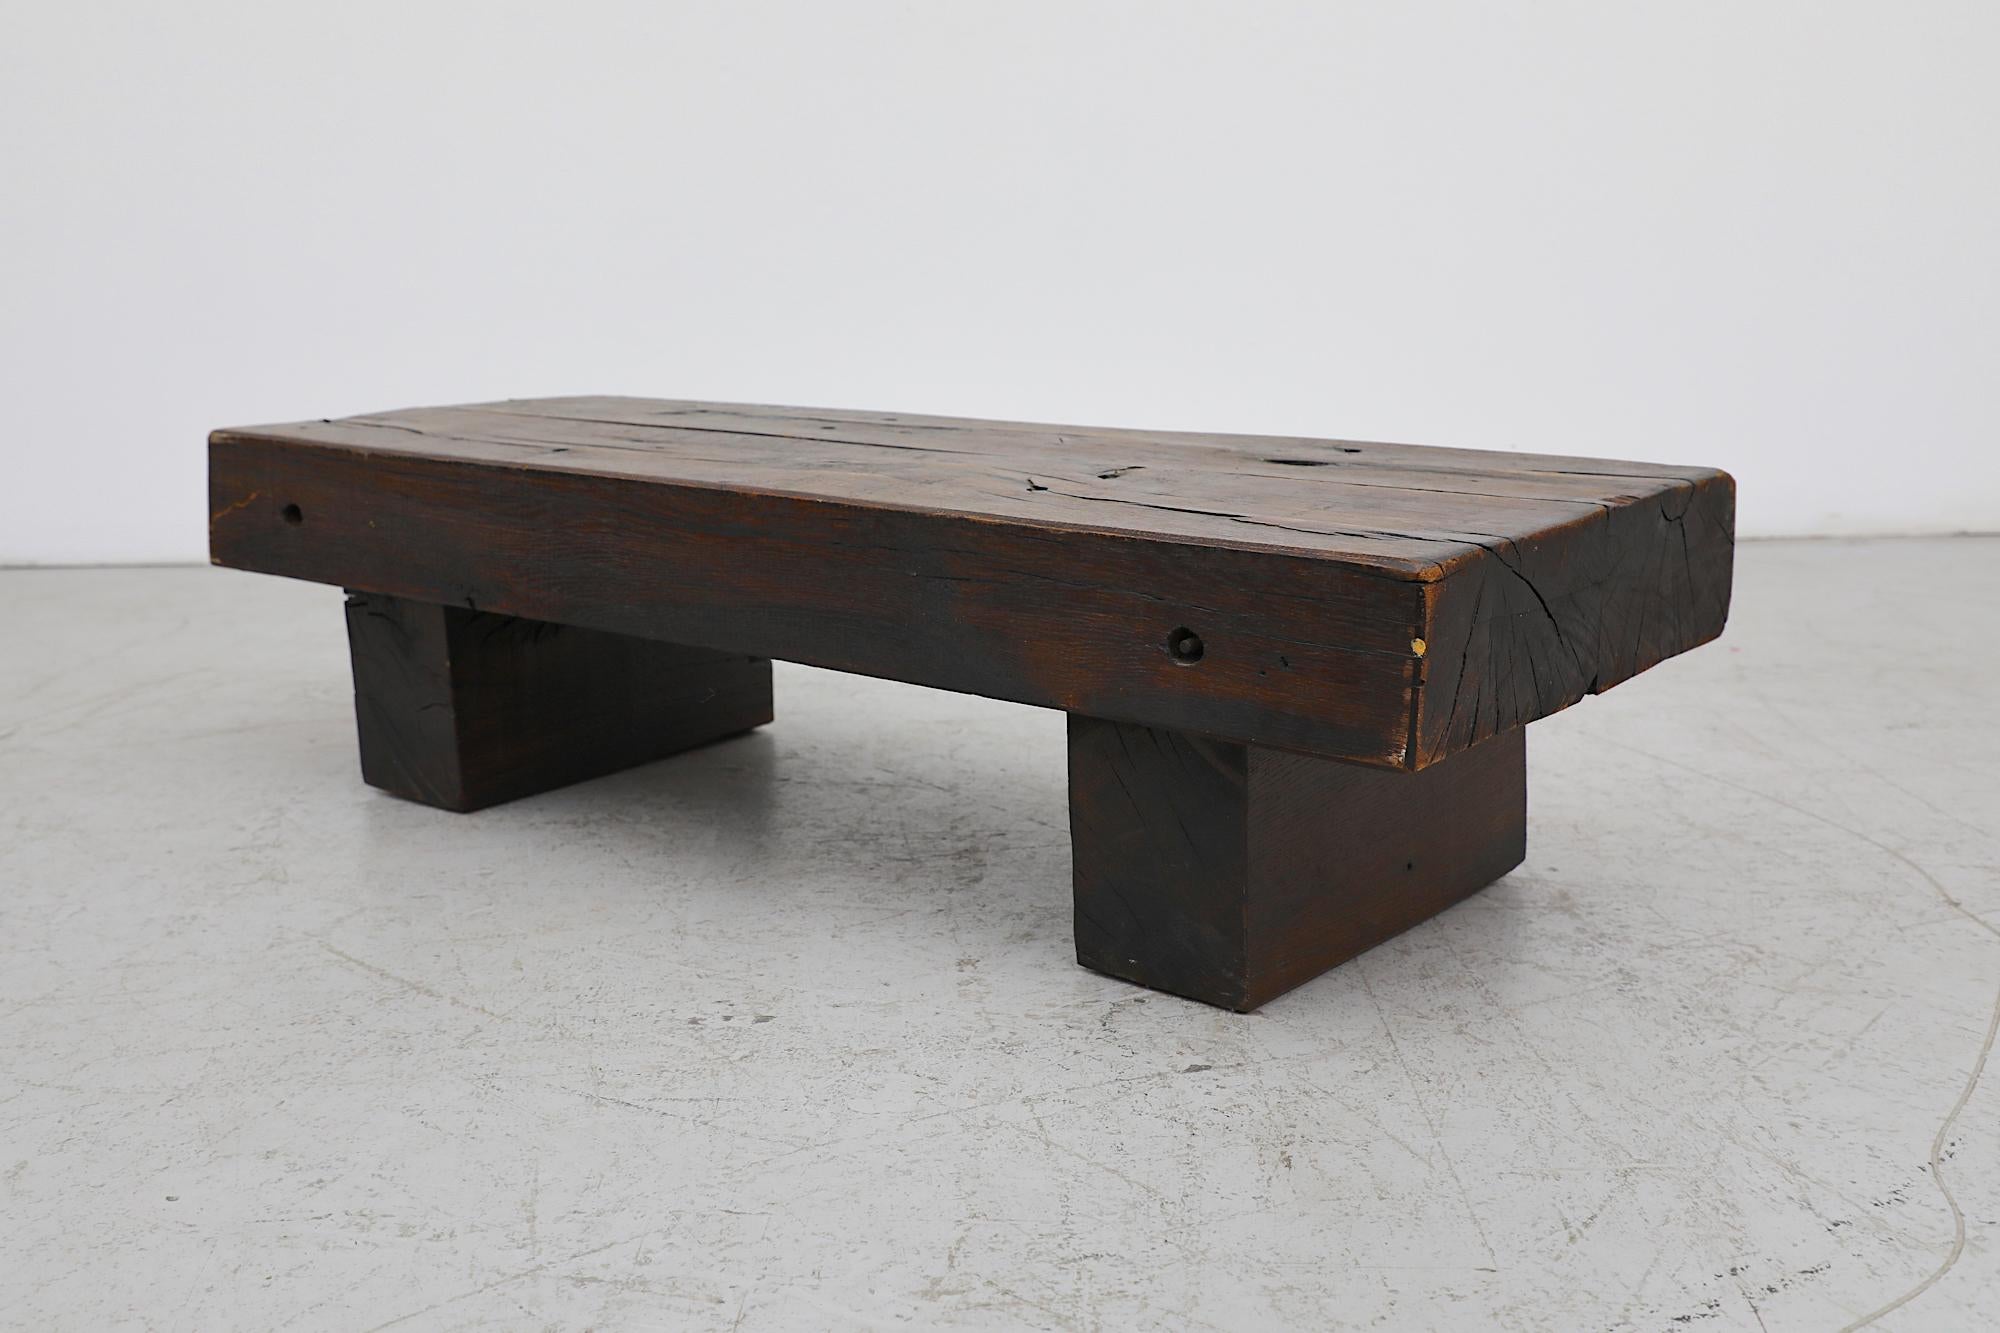 Robust brutalist railroad coffee table or bench made of three very heavy solid dark oak pieces, the top rests on the two legs. In original condition with visible wear, including scratches. Wear is consistent with its age and use.